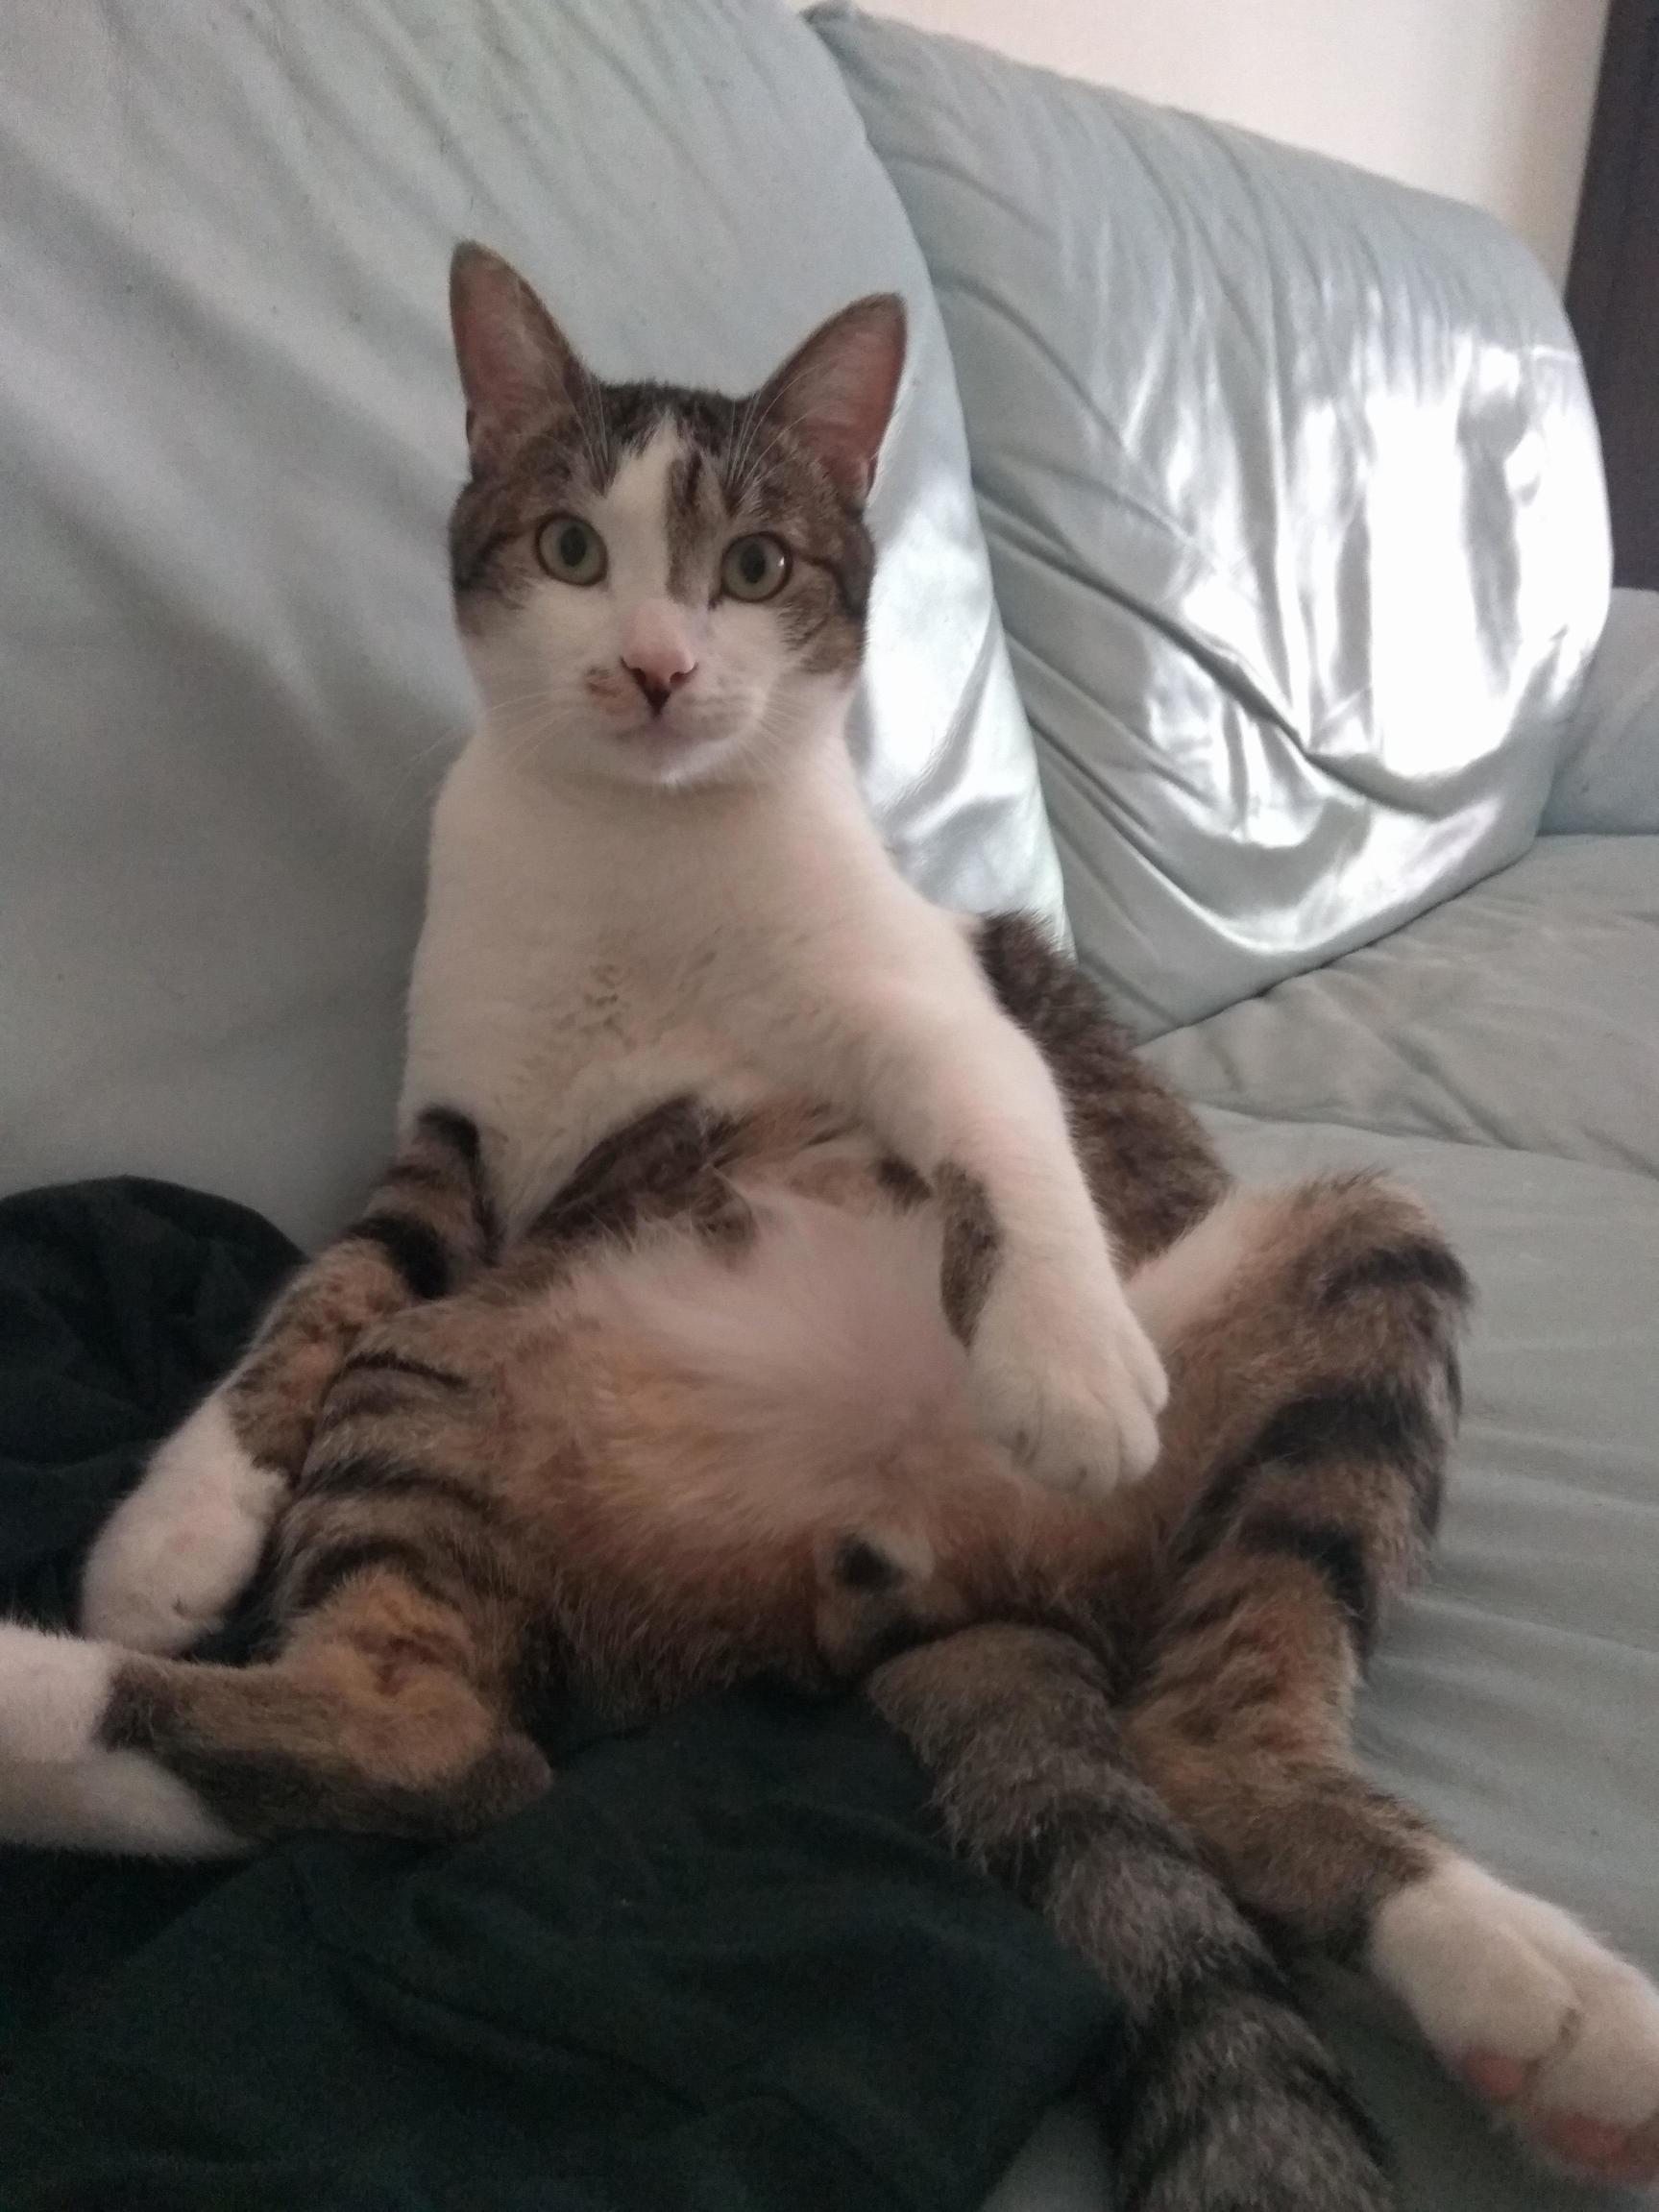 Sometimes he sits like this and then look at me confused about my laughing